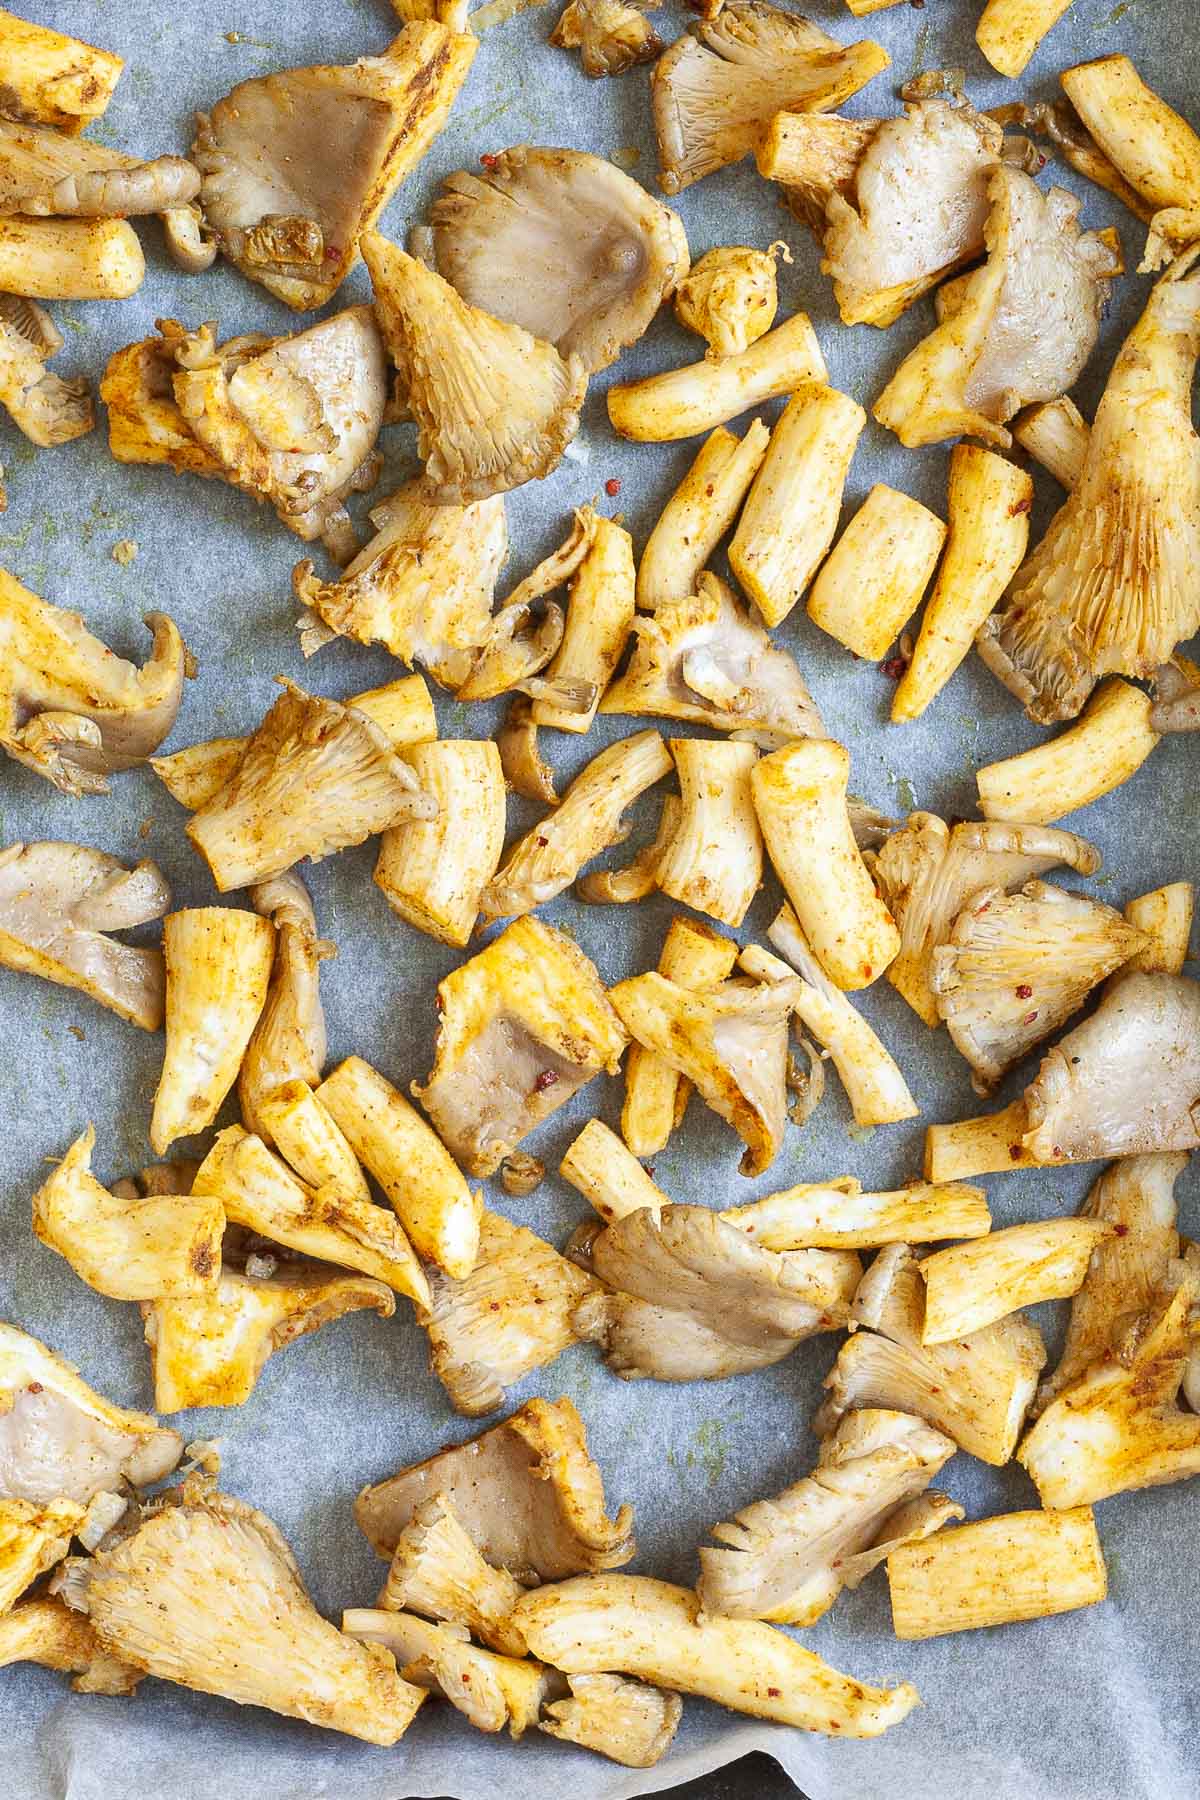 Yellowish raw mushroom shreds on a parchment paper.